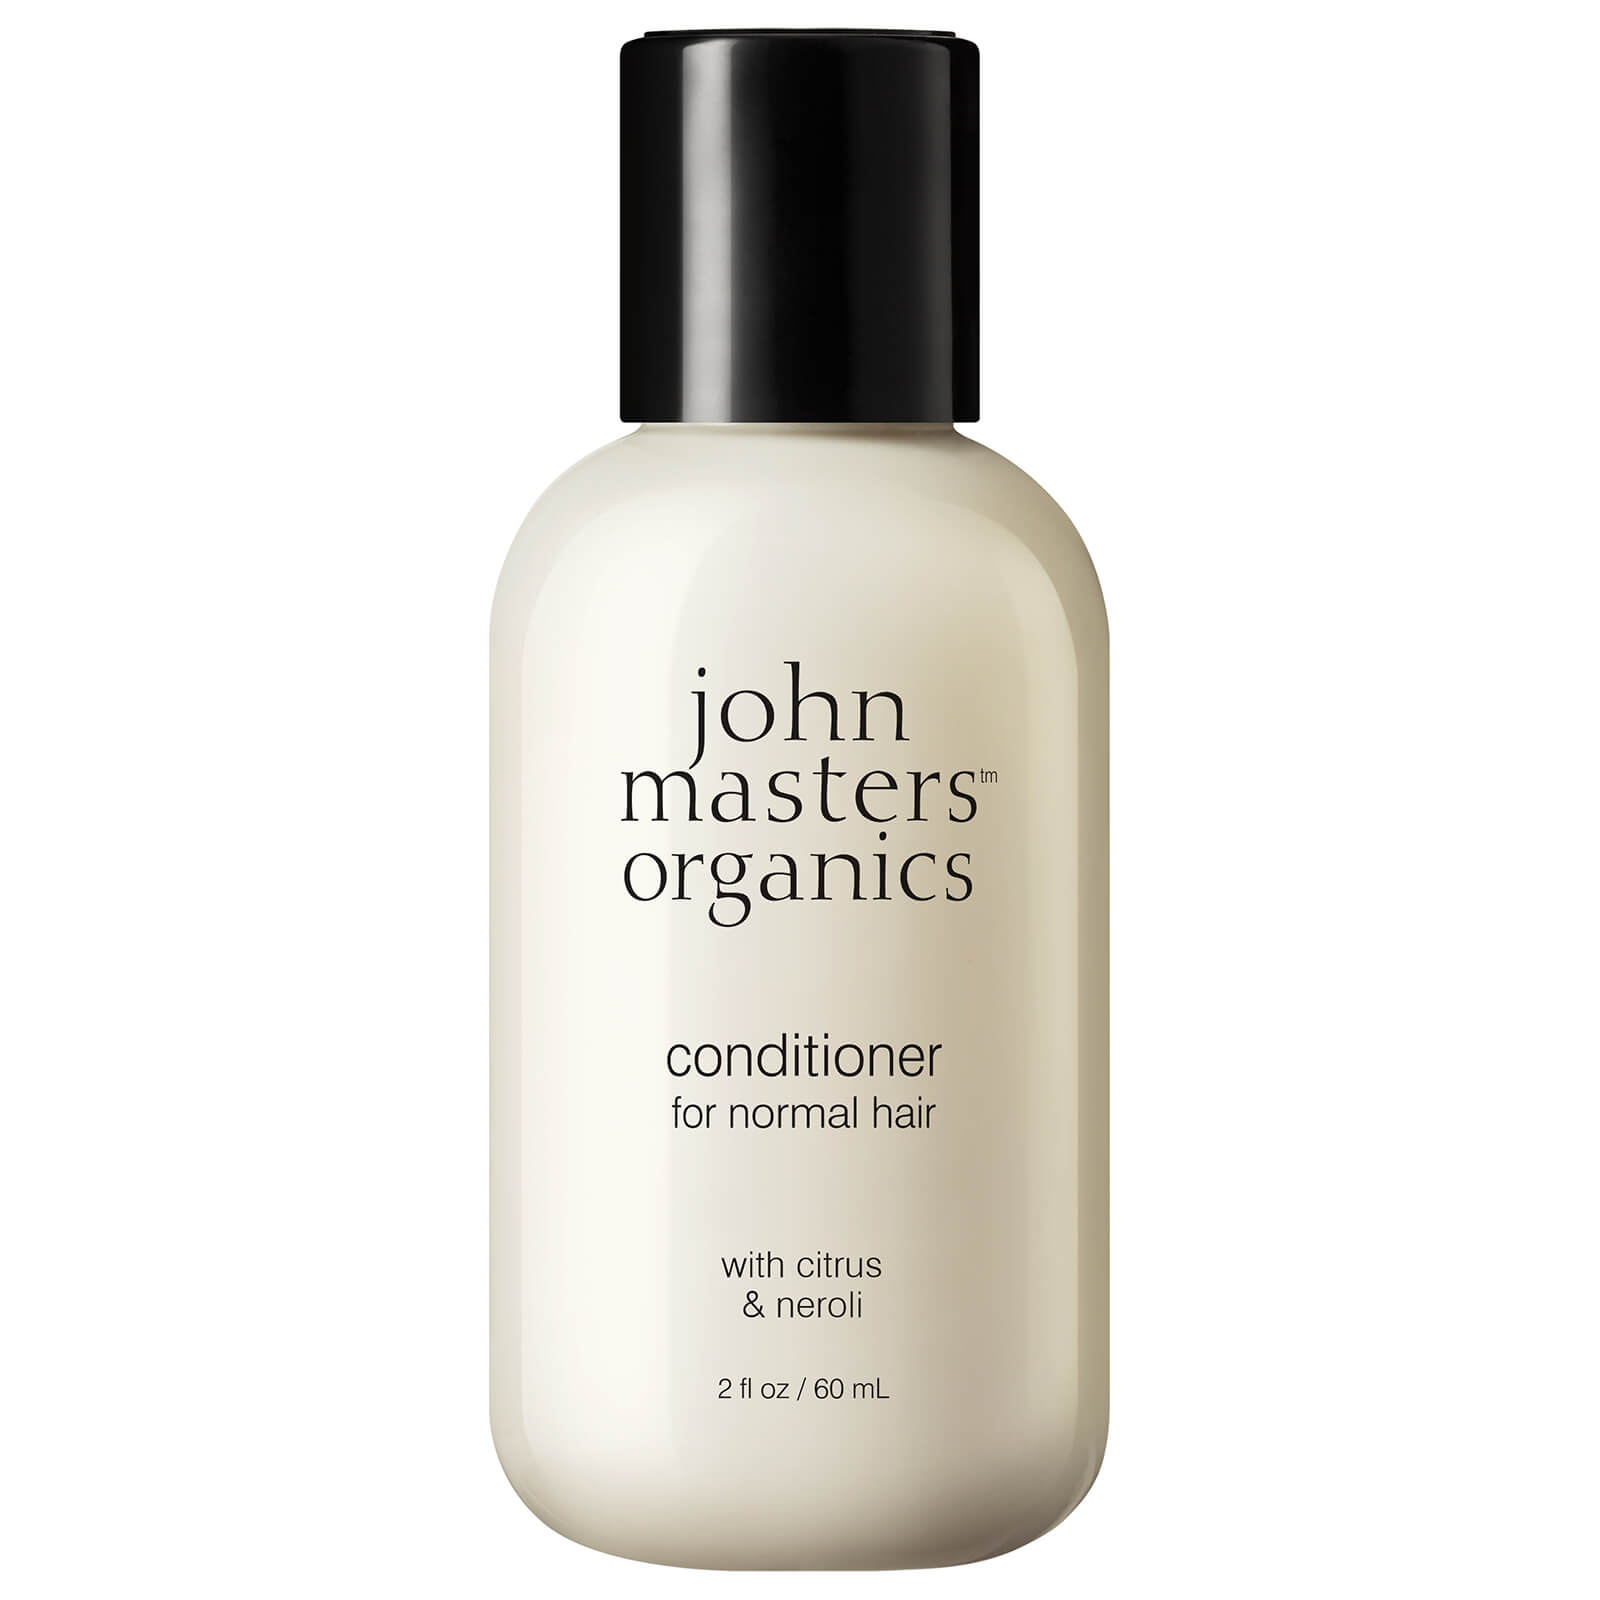 John Masters Organics Conditioner for Normal Hair 60ml (Free Gift)